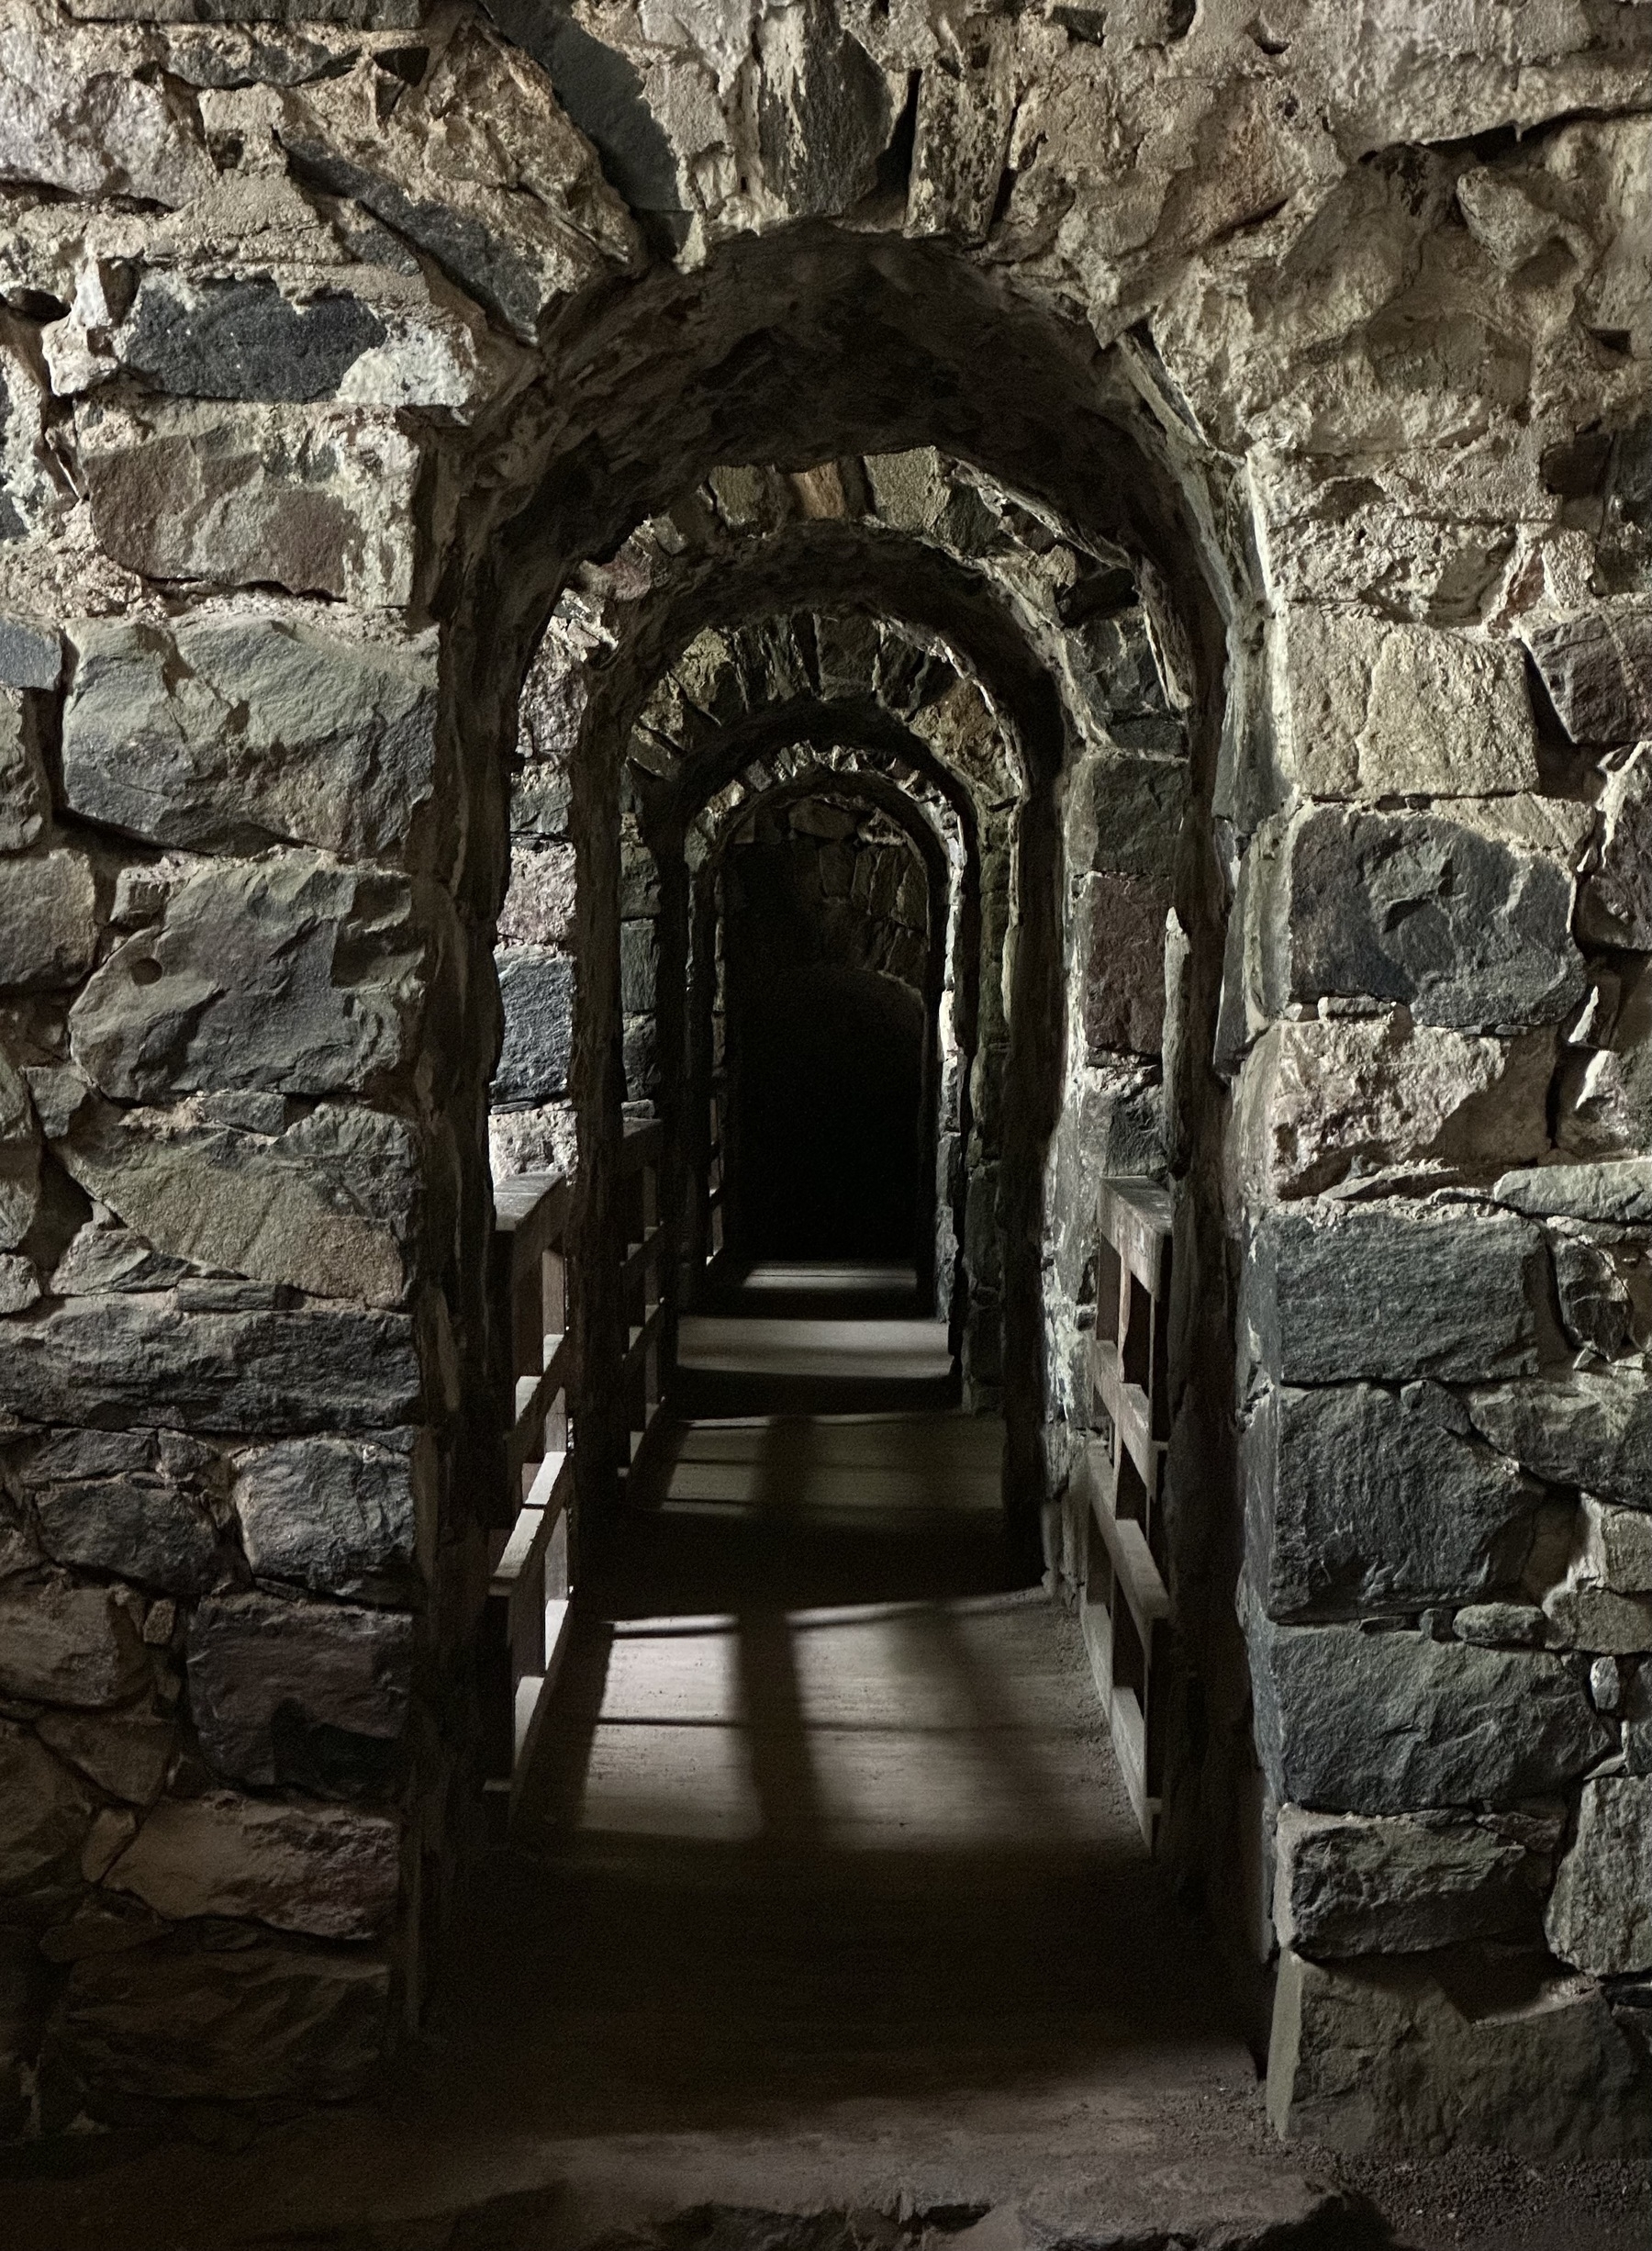 A series of stone arches over a walkway, leading off in to the darkness.